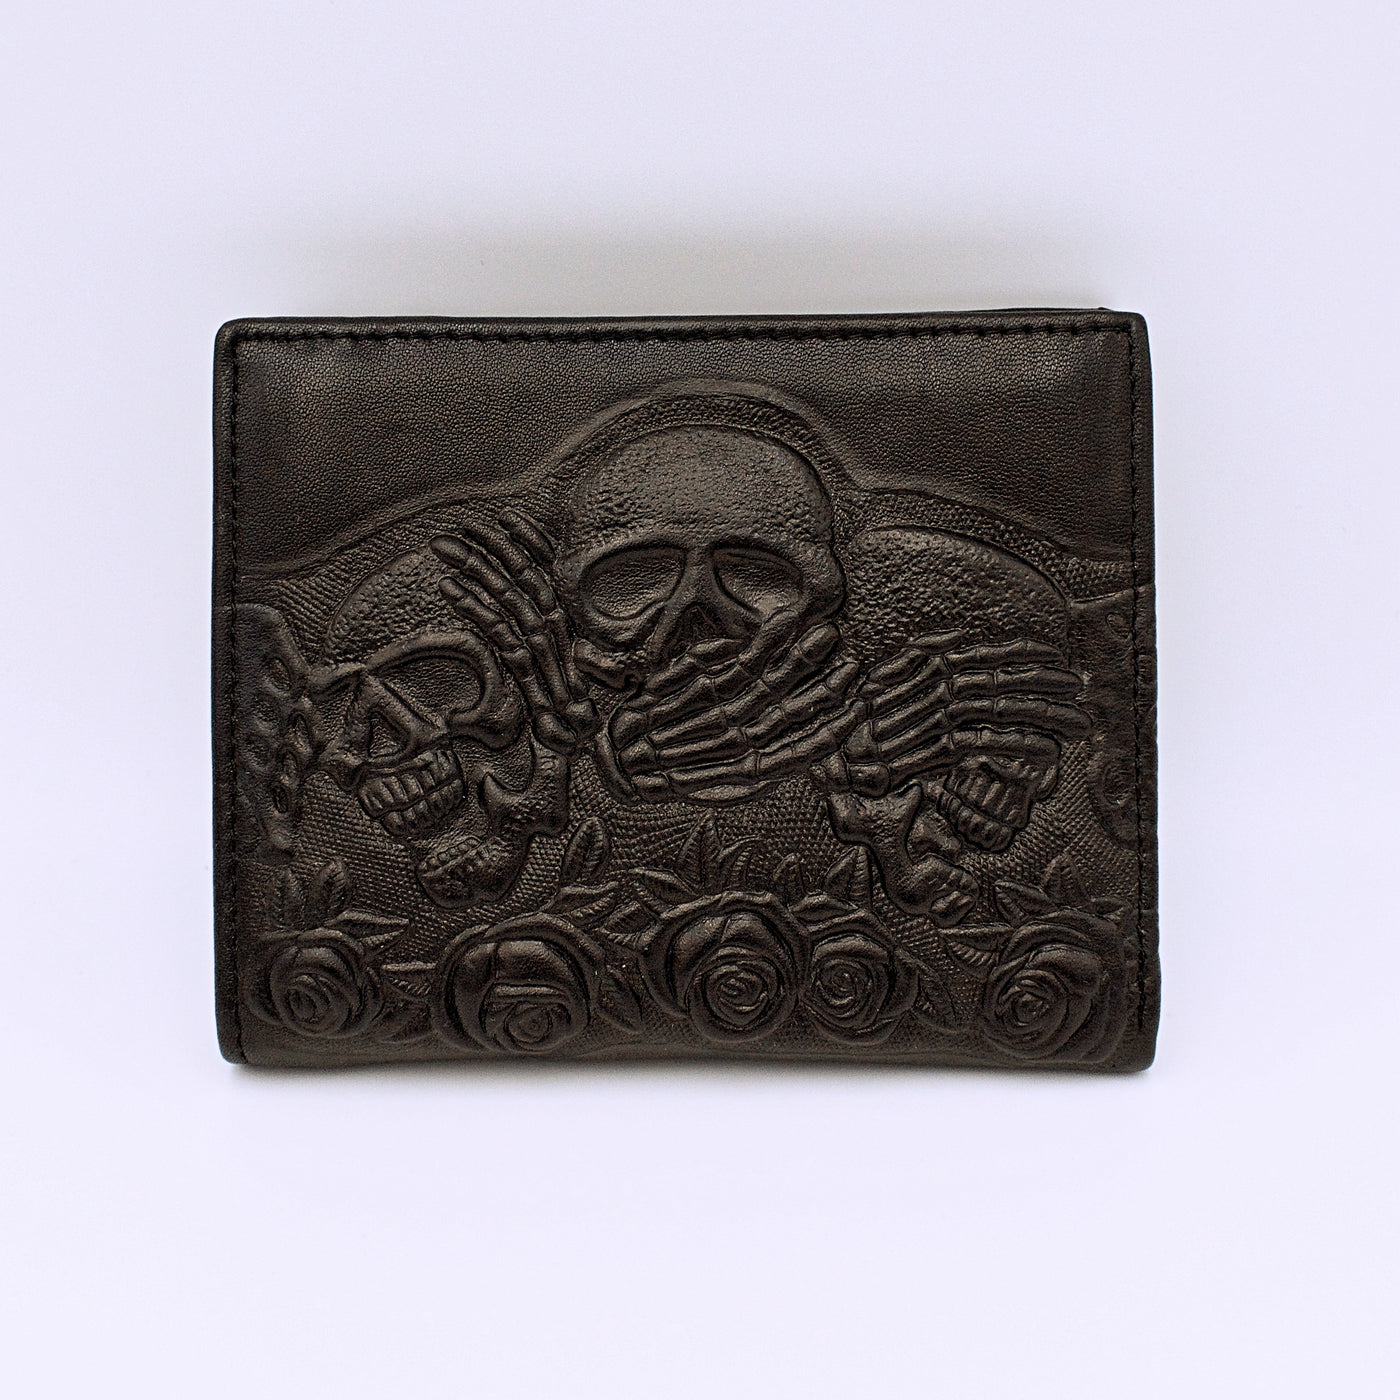 Skull and Roses Embossed Leather Wallets - The Cranio Collections